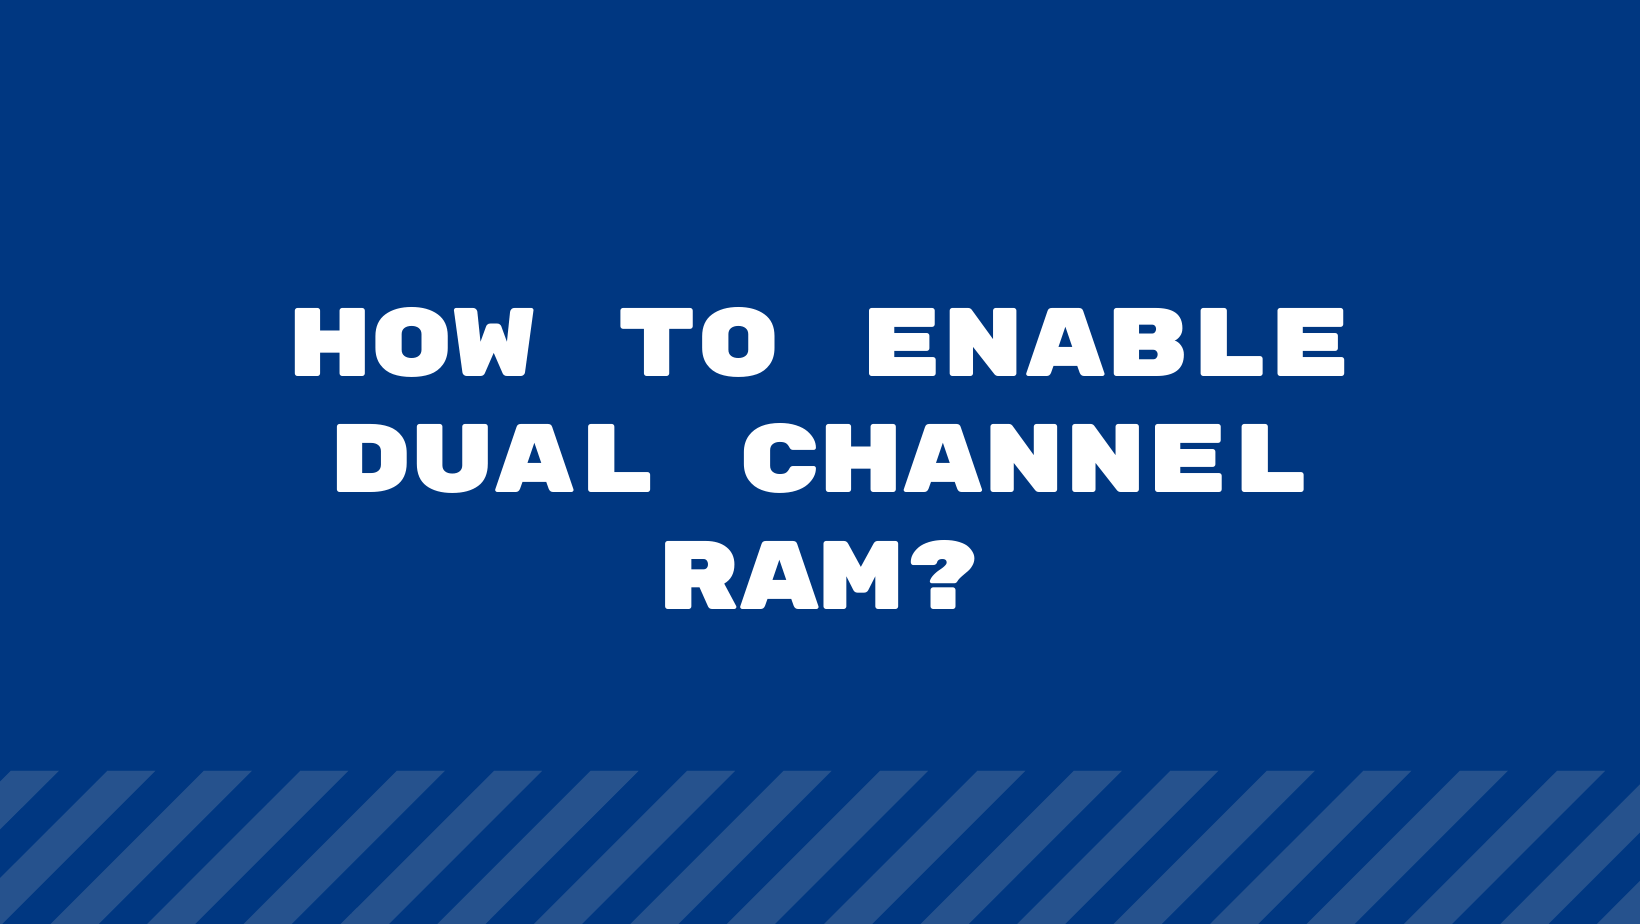 How To Enable Dual Channel Ram